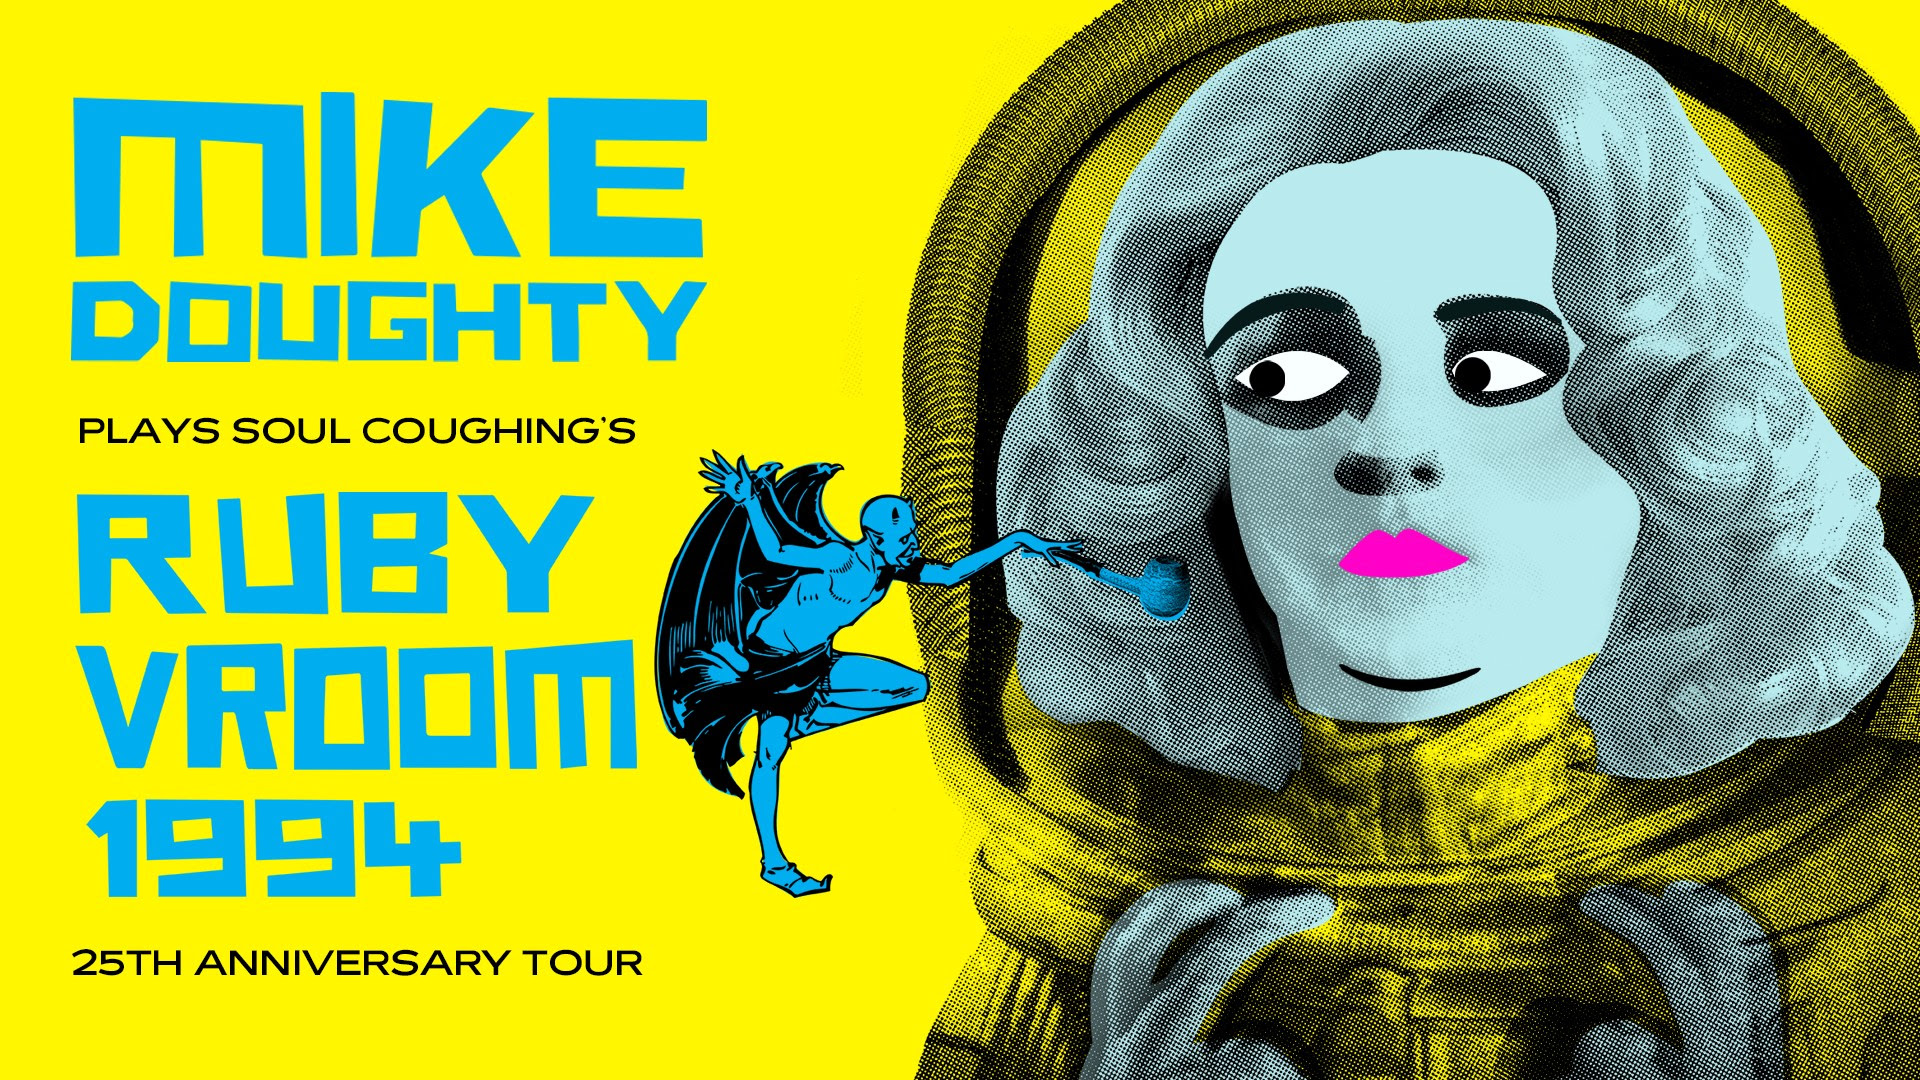 Mike Doughty to perform Soul Coughing’s "Ruby Vroom"